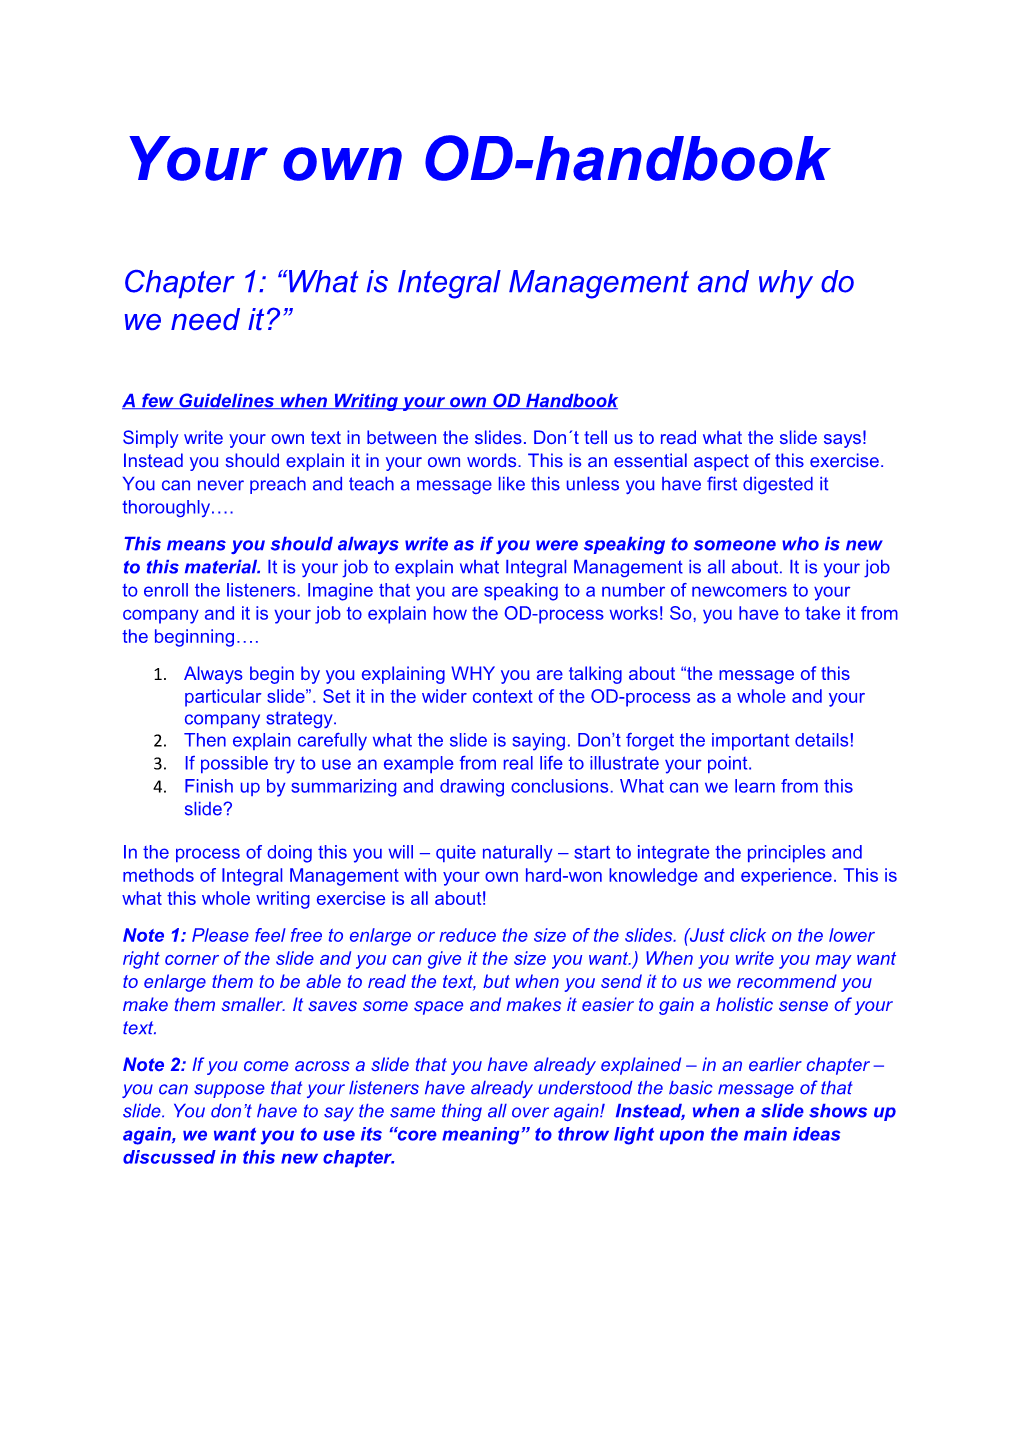 A Few Guidelines When Writing Your Own OD Handbook